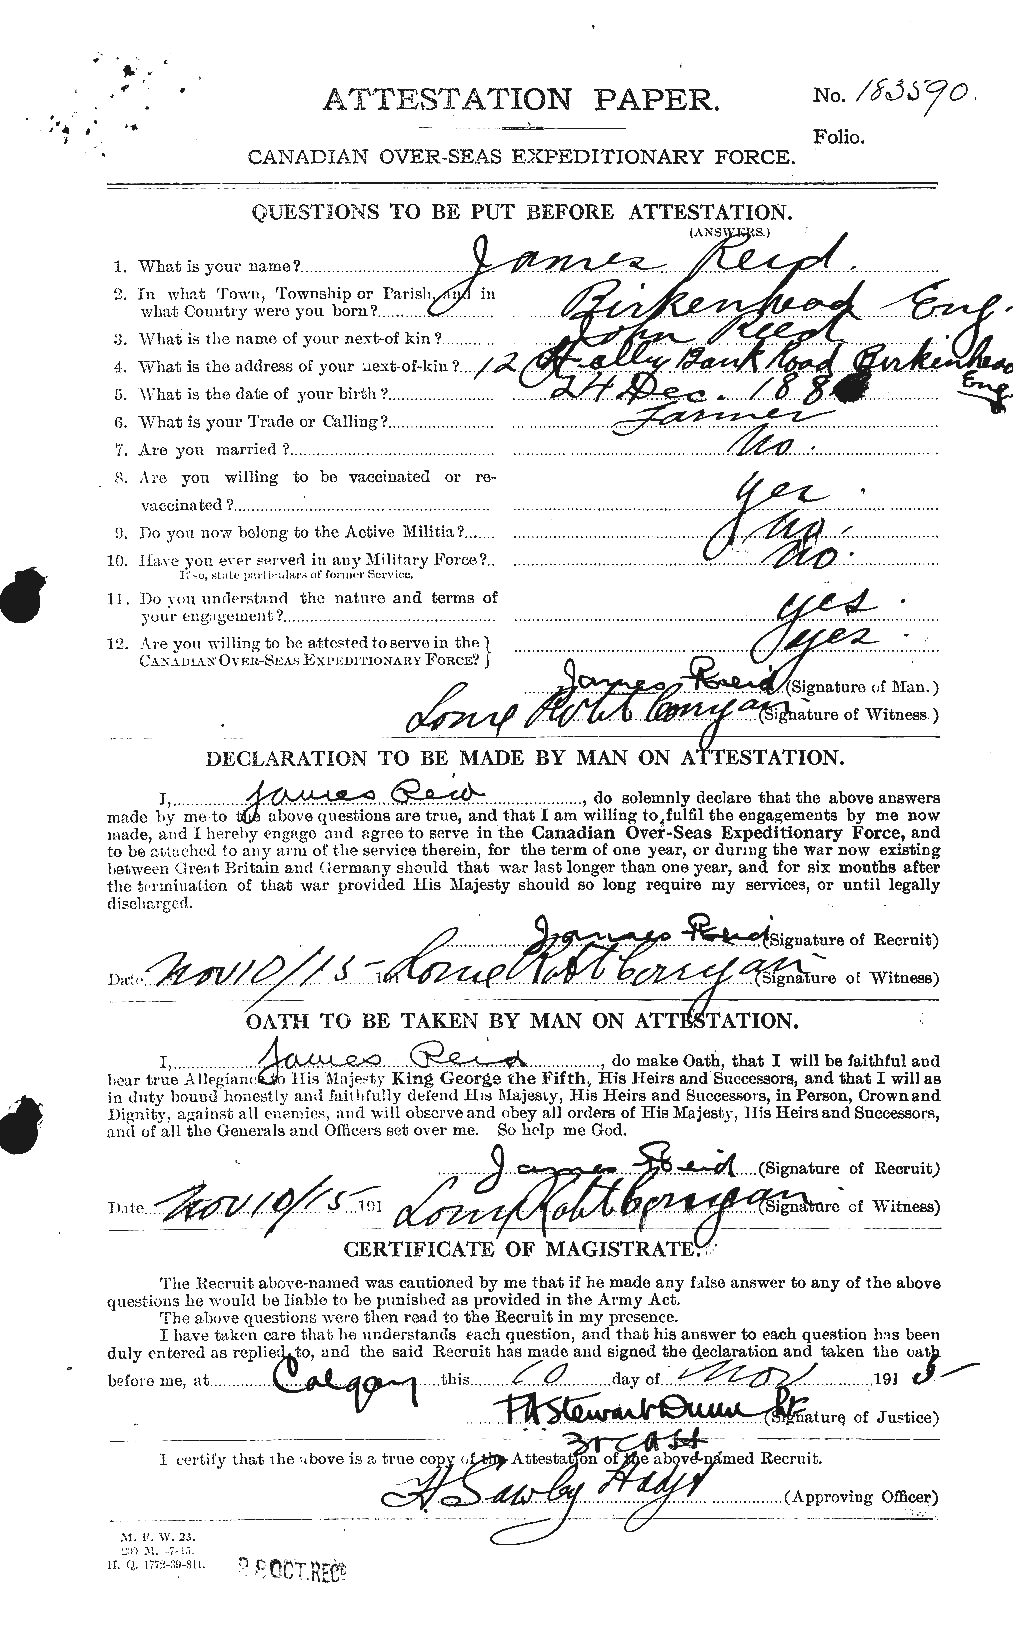 Personnel Records of the First World War - CEF 598652a